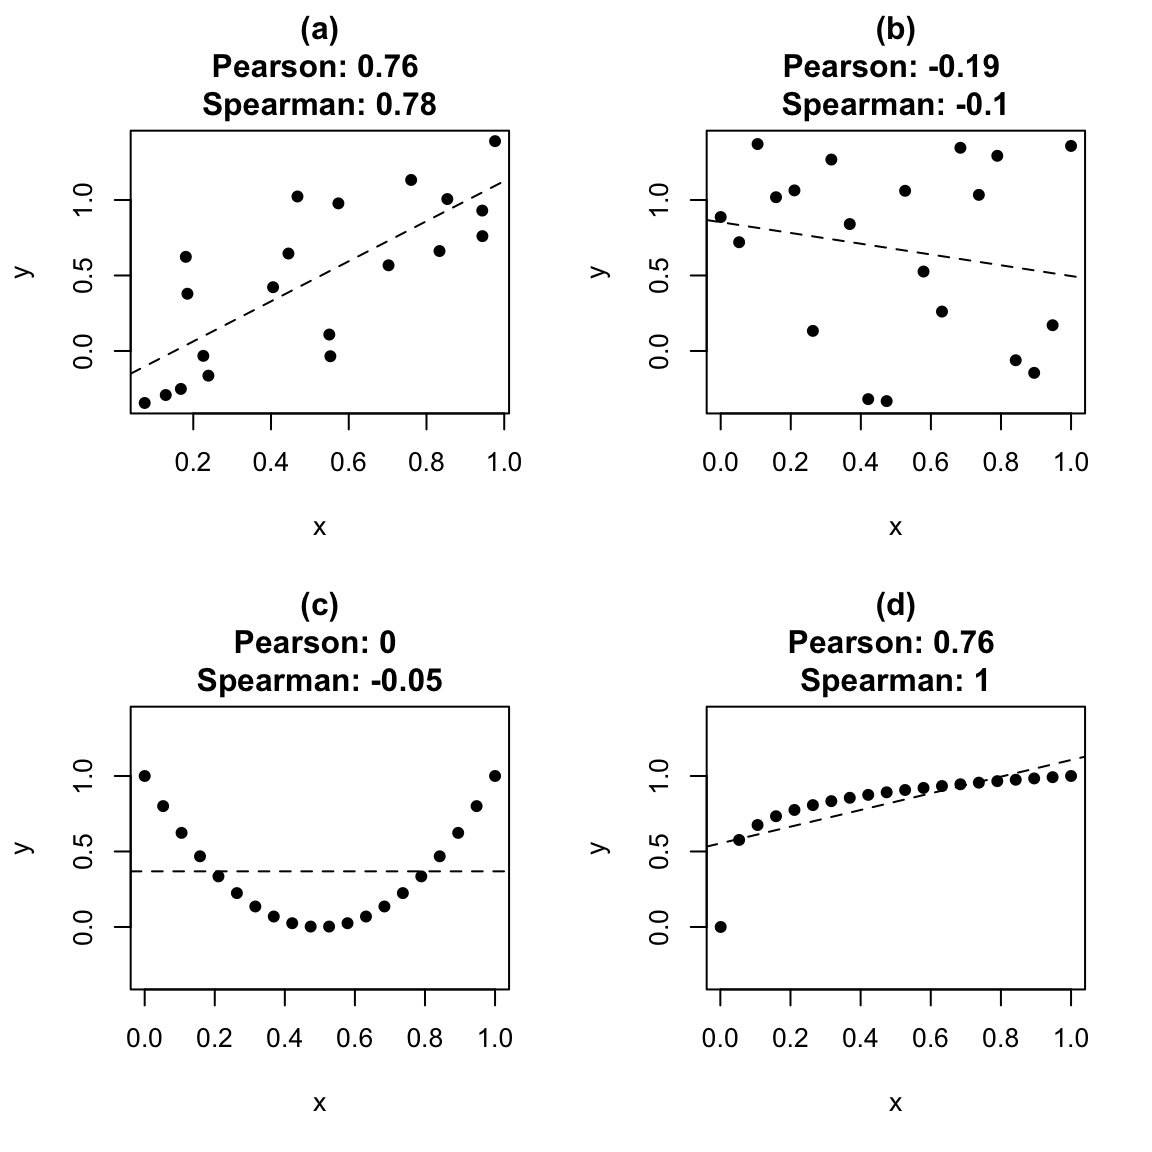 Correlation coefficients and linear trends. In (a), the correlation is quite large, even though there is fair amount of 'random variation' in the data. In (b), the two variables were generated independently, but still resulted in a Pearson correlation of -0.19: 'moderate' correlation values can be observed purely by luck. In (c), $x$ and $y$ are clearly related, but the Pearson correlation is 0: there is no \textit{linear} trend. In (d), the relationship between $x$ and $y$ is monotone, but nonlinear, and the Spearman correlation is greater than Pearson's.